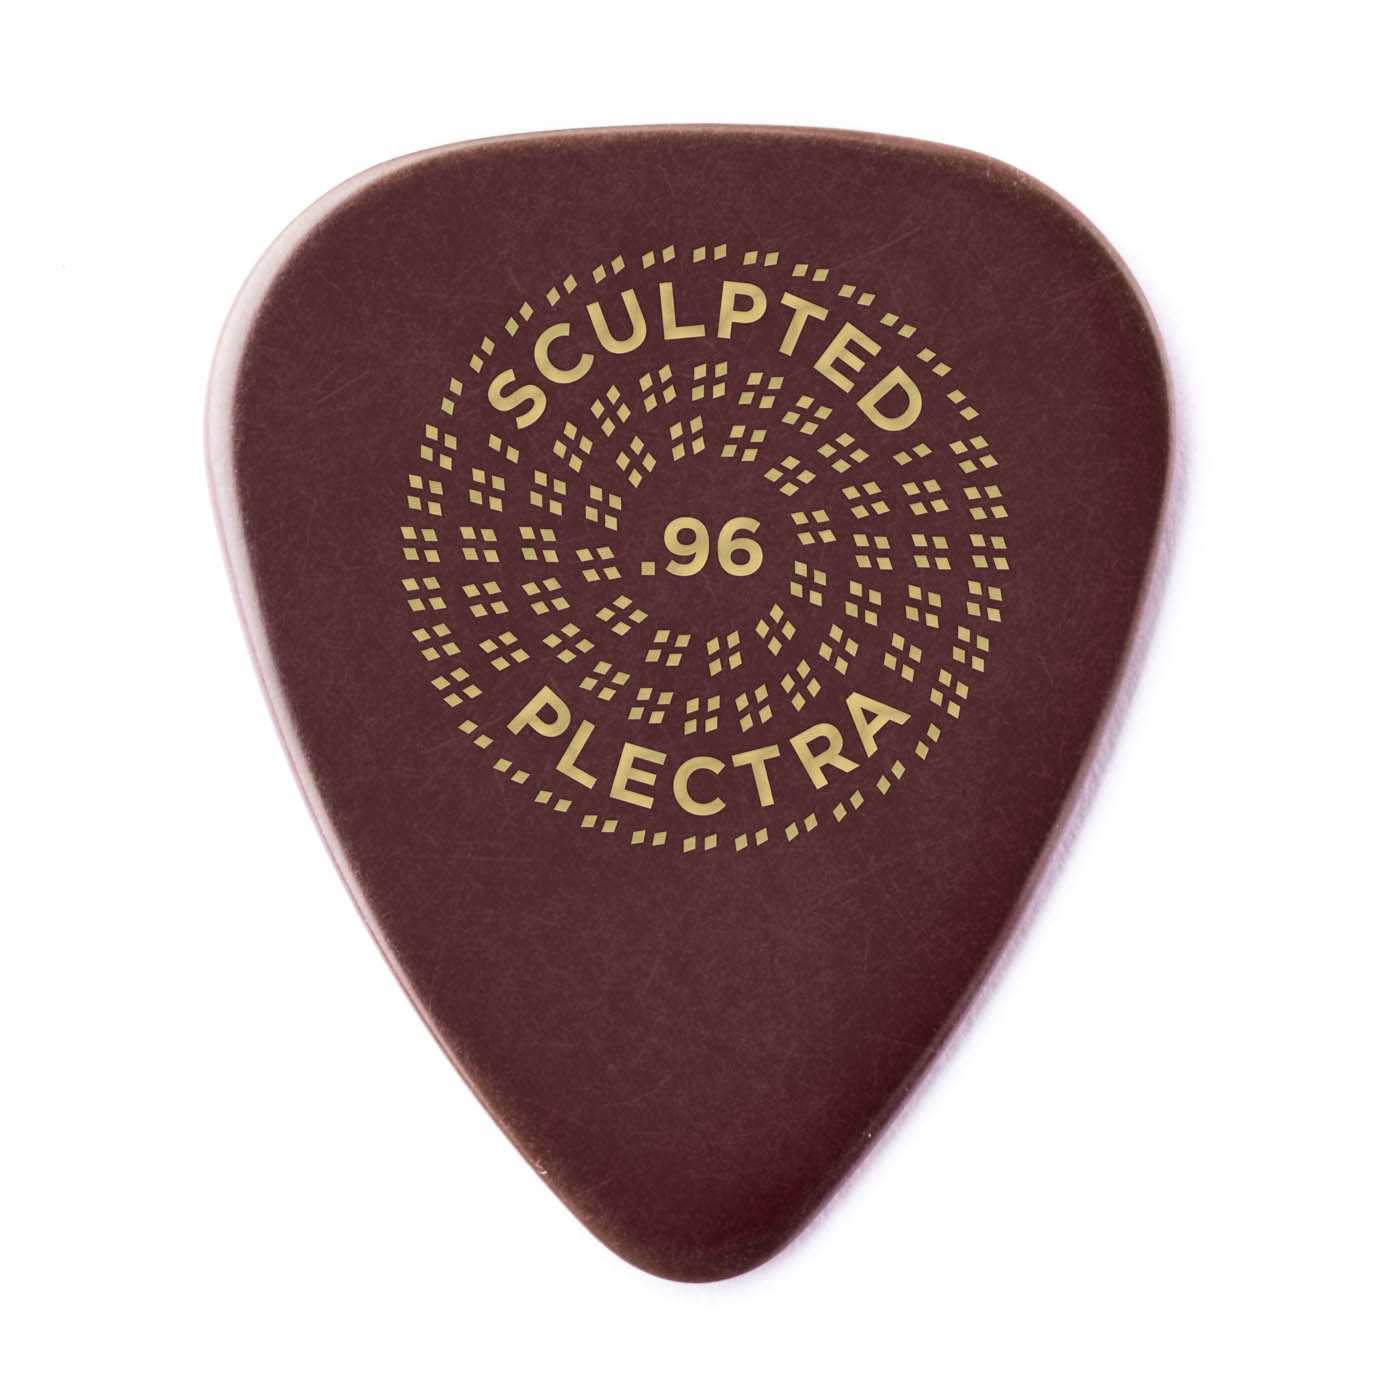 Image 2 of Dunlop Primetone Sculpted Plectra, Ultex Standard, 0.96MM Thick, Three Pack - SKU# PK511-096 : Product Type Accessories & Parts : Elderly Instruments